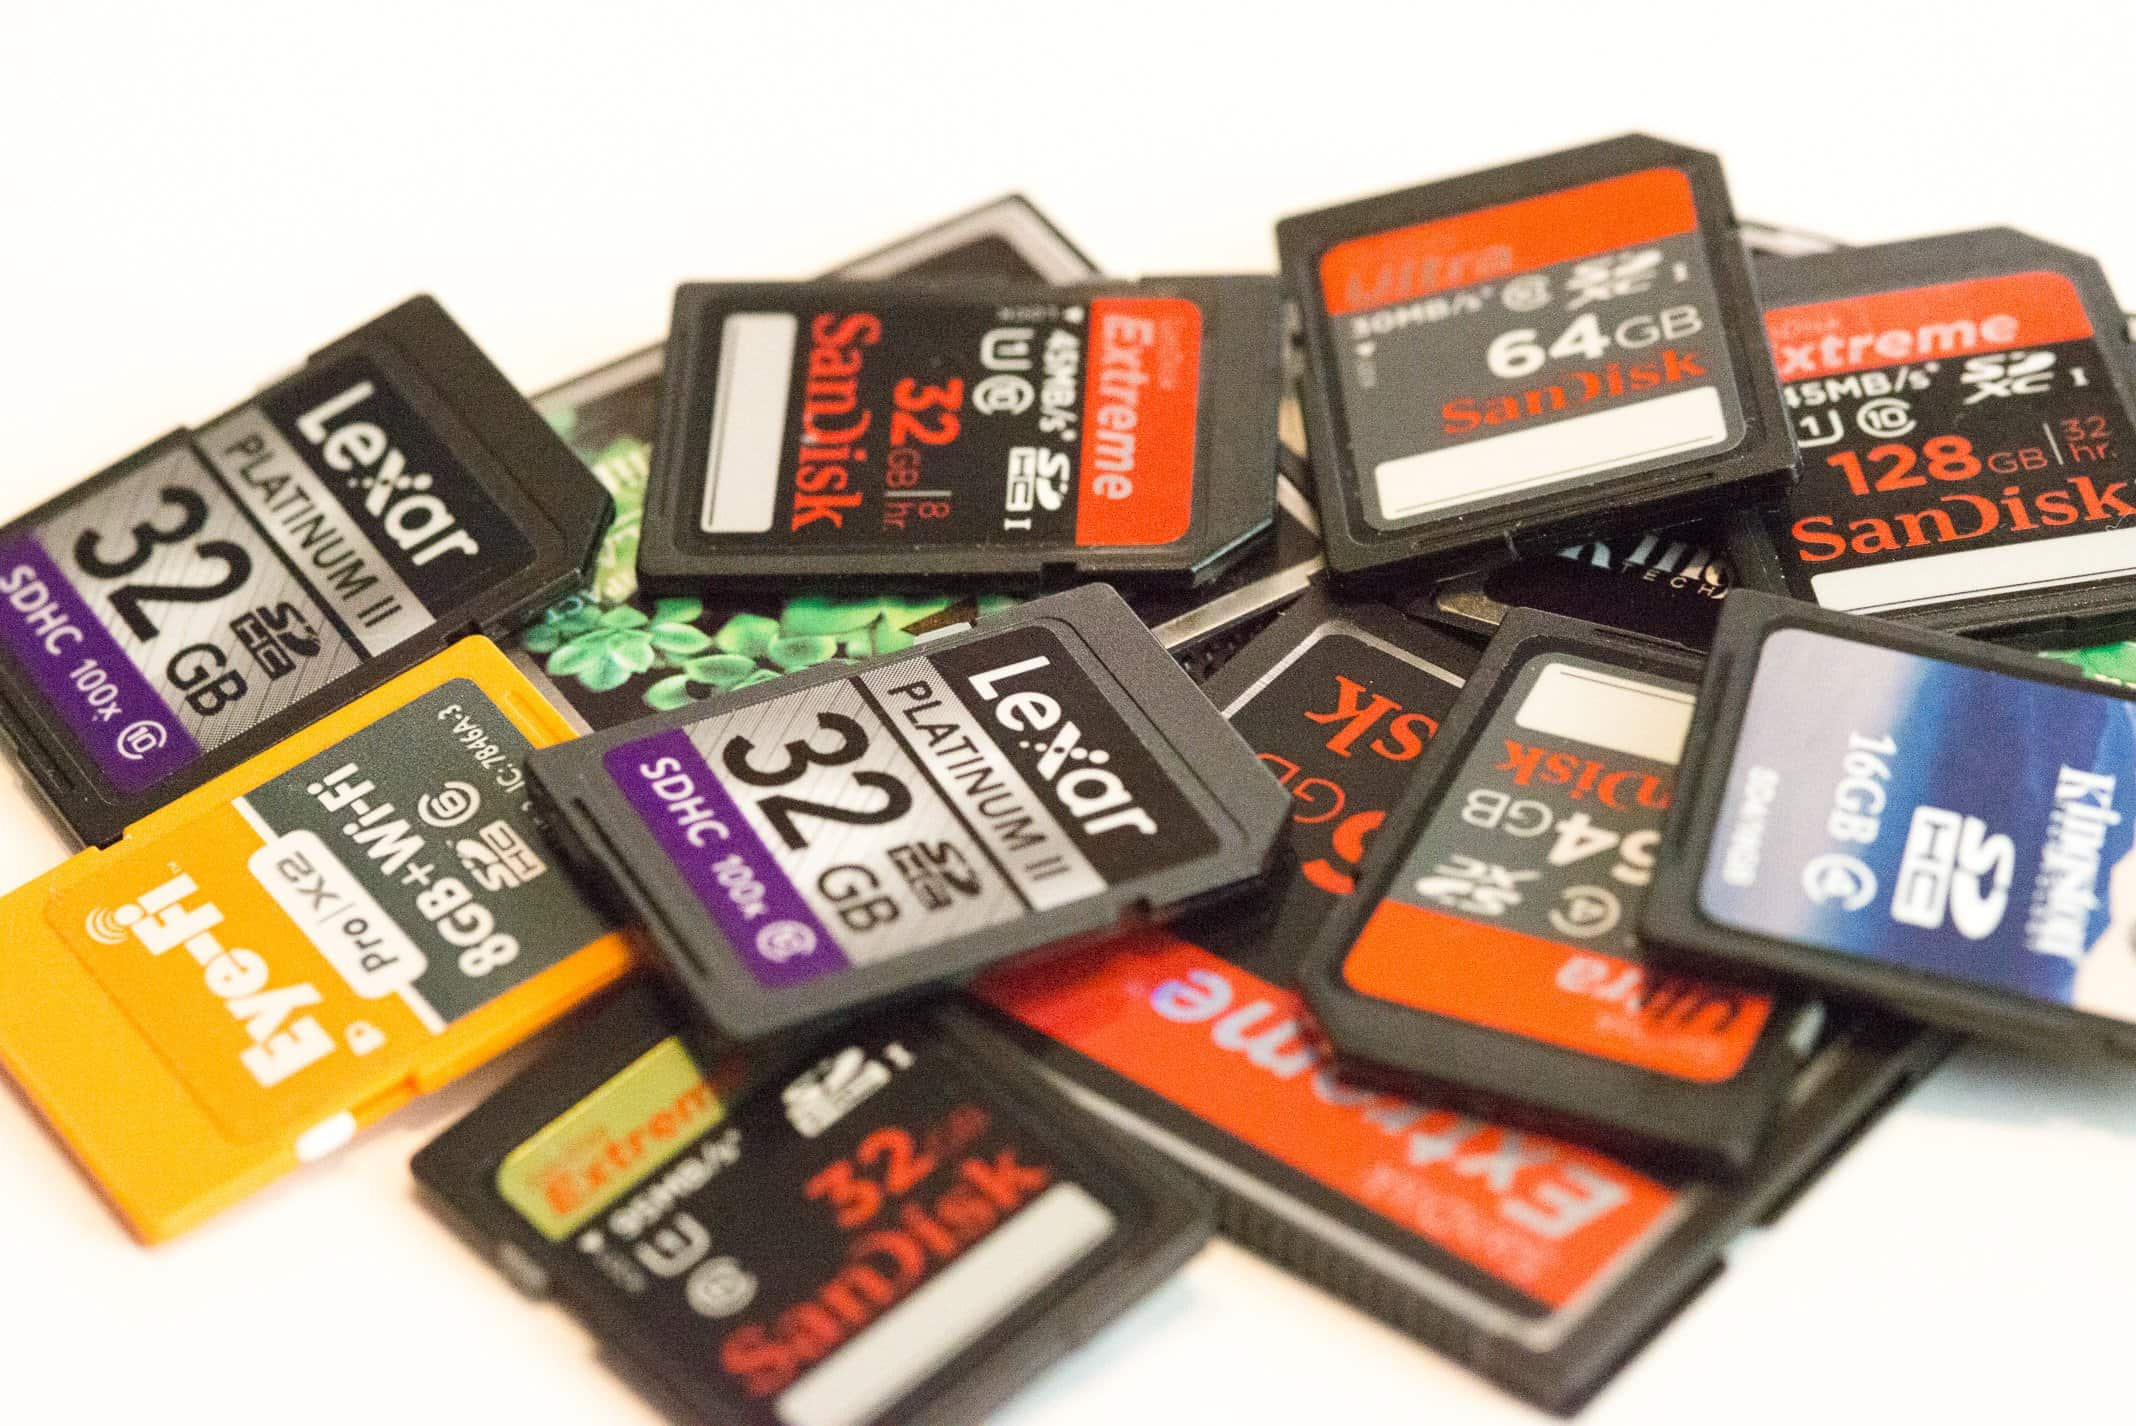 How To Recover Deleted Photos From Sd Card | December 2020